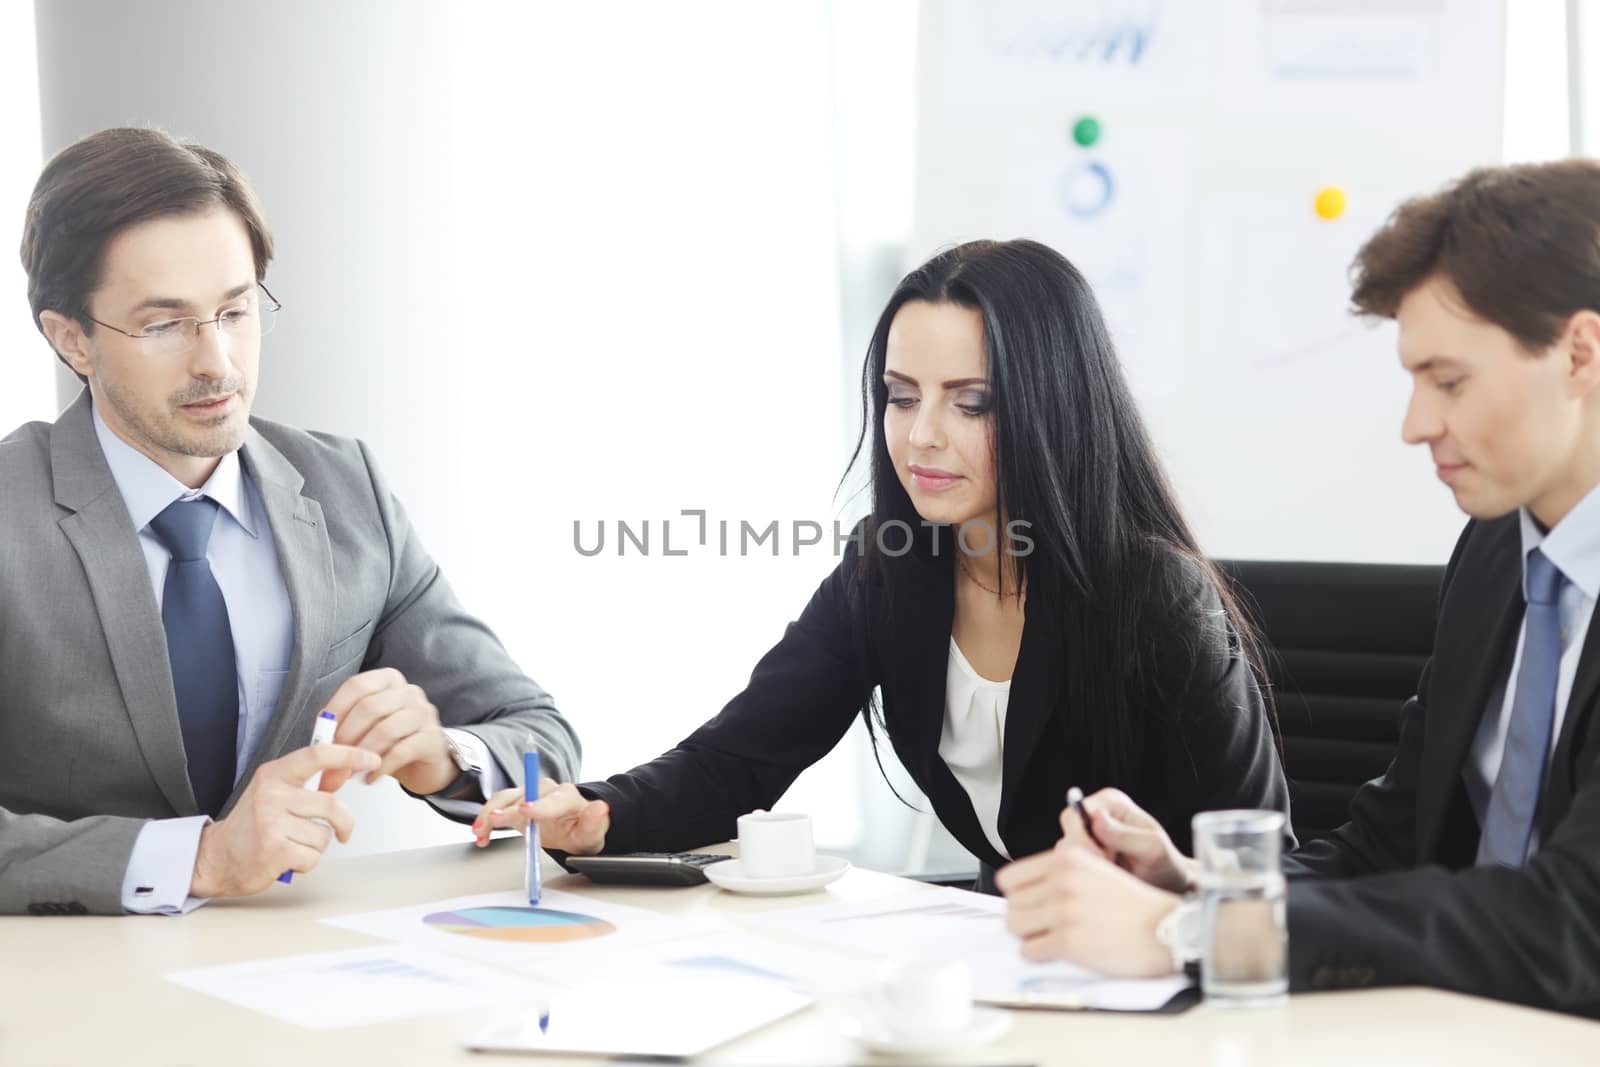 Business people discussing financial reports during a meeting